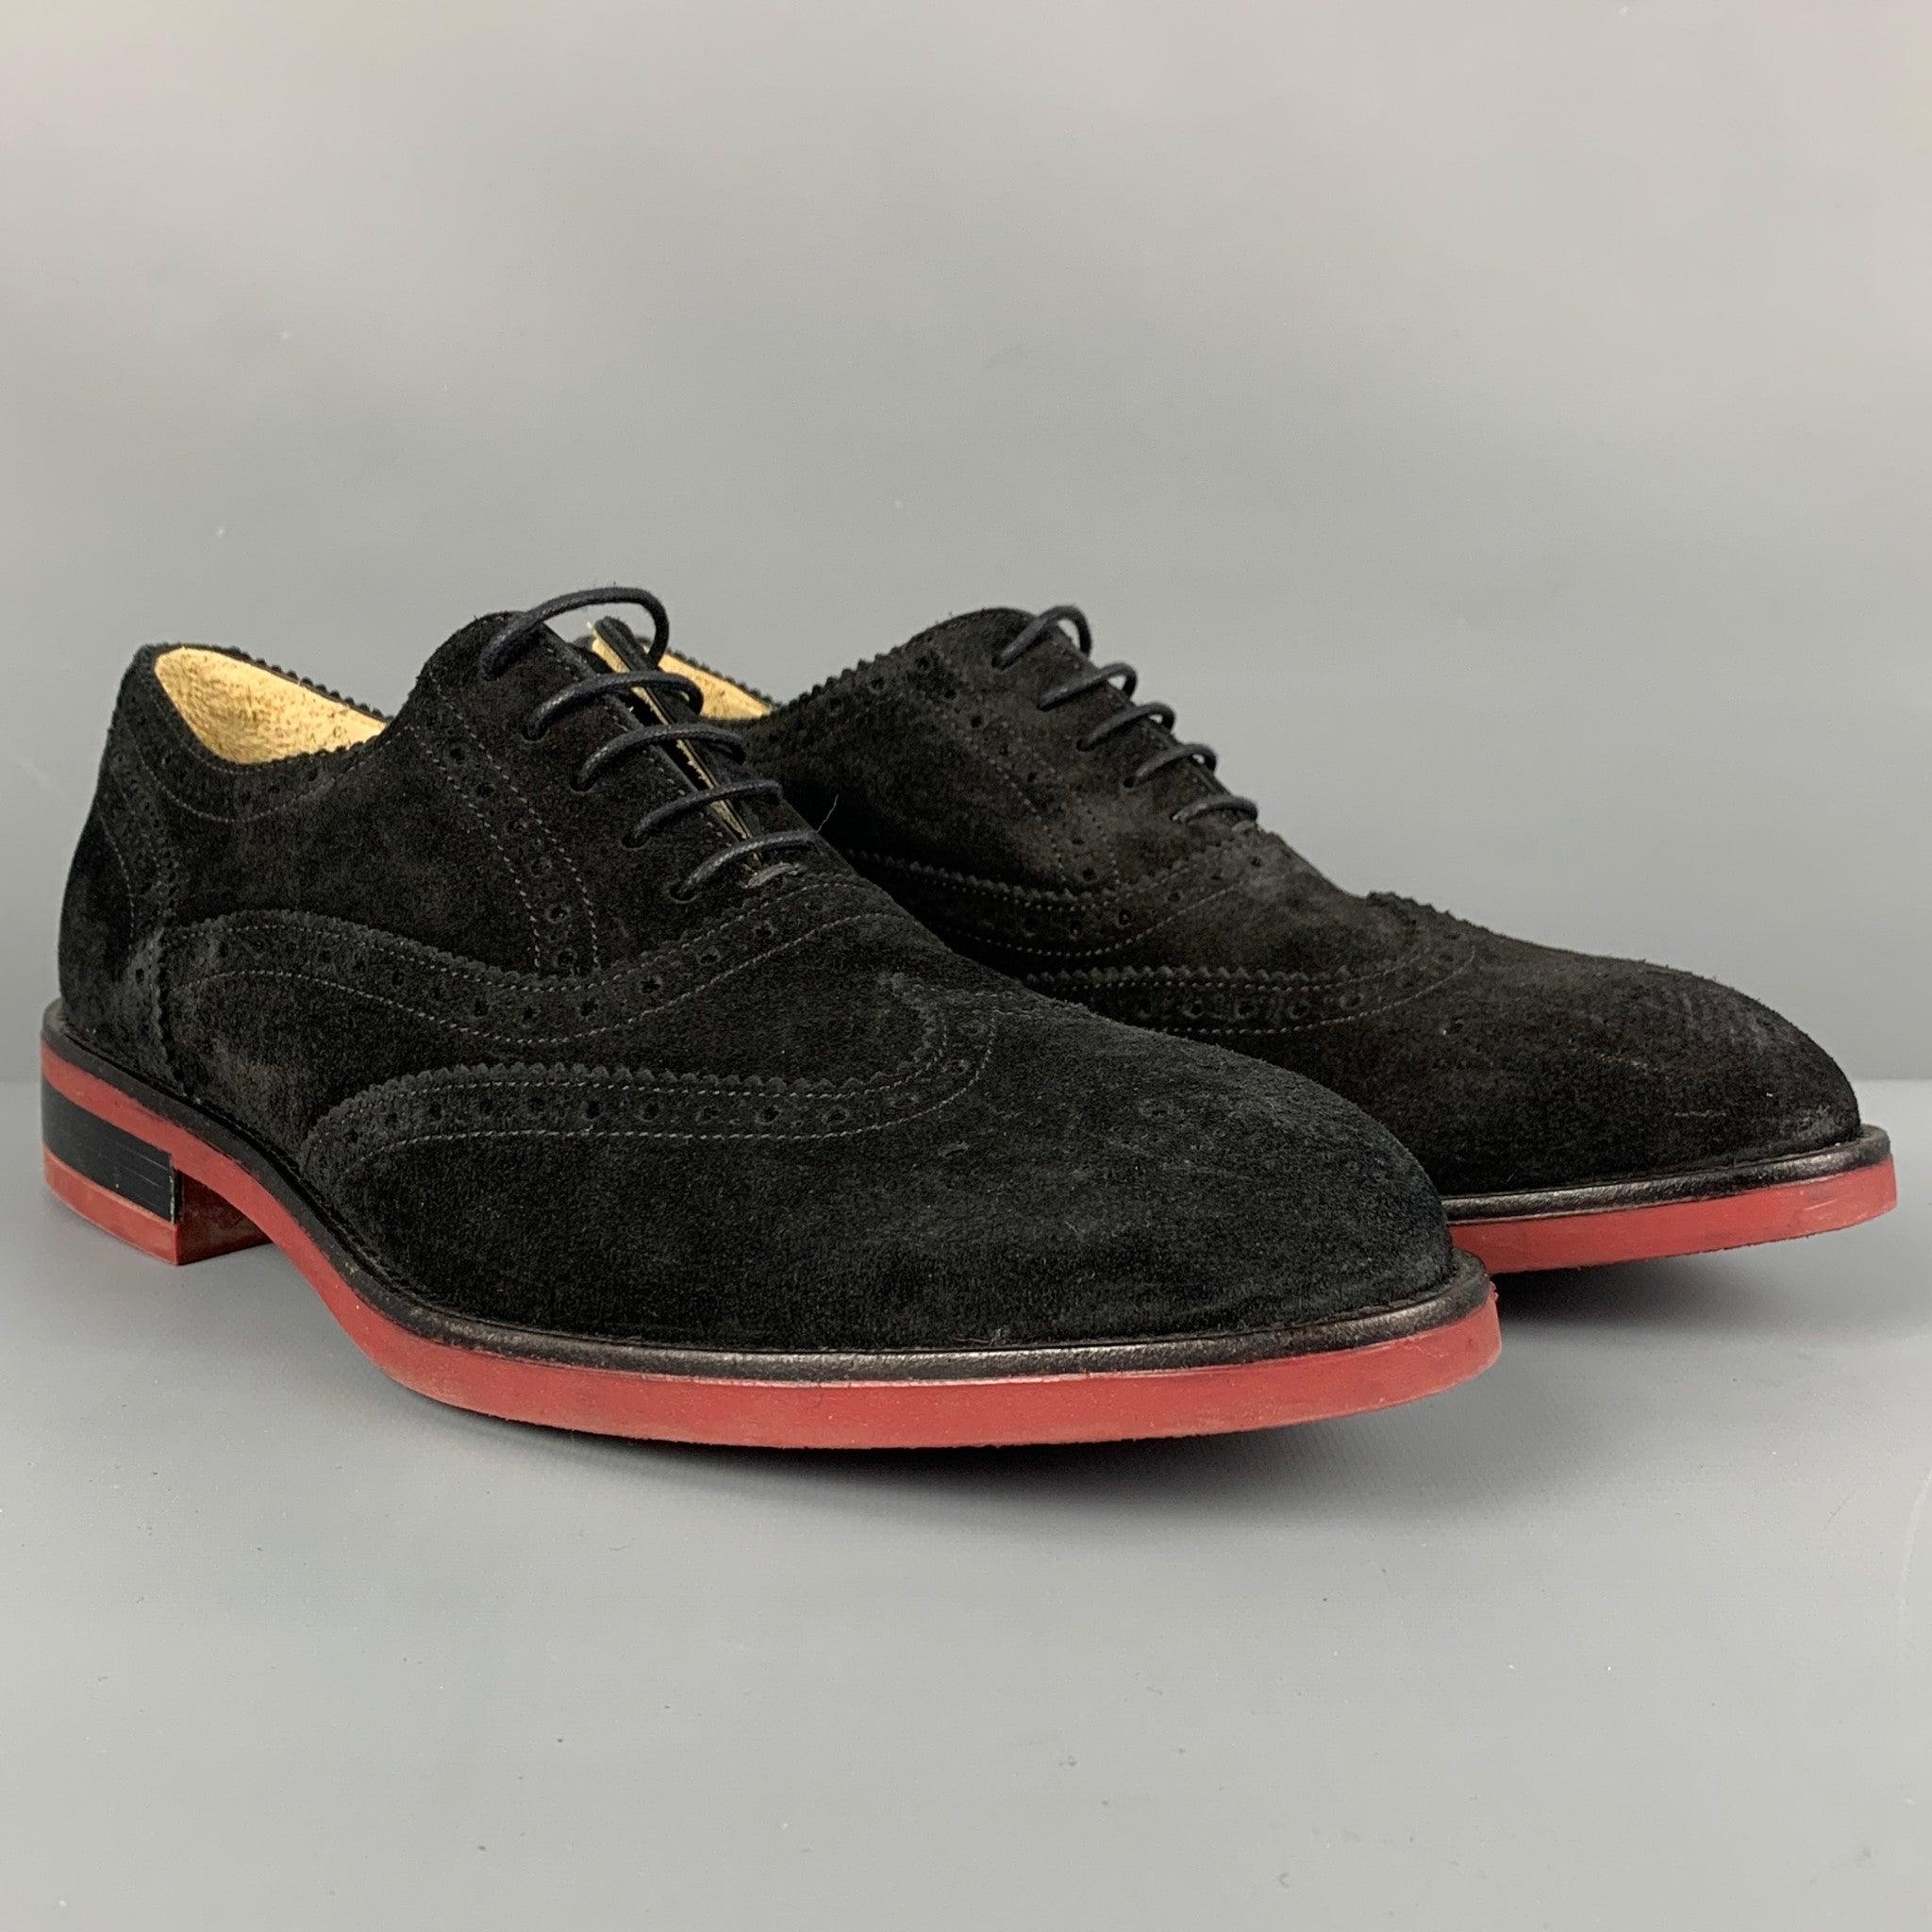 PAUL SMITH shoes comes in a black & brick perforated suede featuring a wingtip style and a lace up closure. Made in Italy. Very Good
Pre-Owned Condition. 

Marked:   No size markedOutsole: 12.25 inches  x 4.5 inches 
  
  
 
Reference: